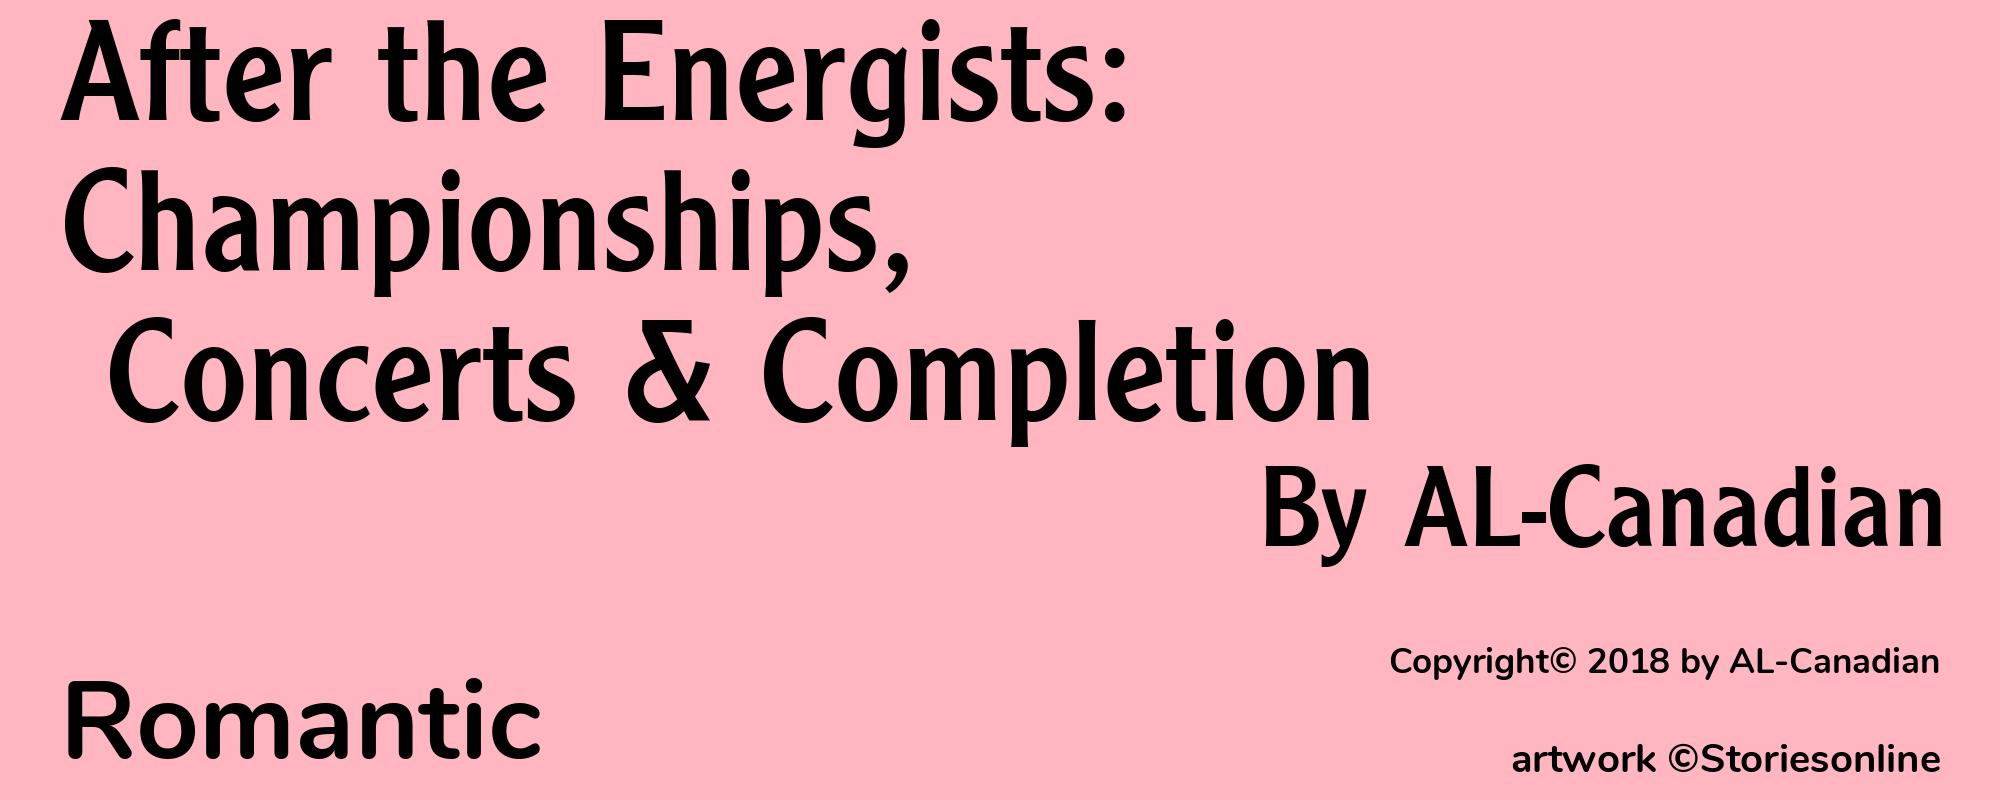 After the Energists: Championships, Concerts & Completion - Cover